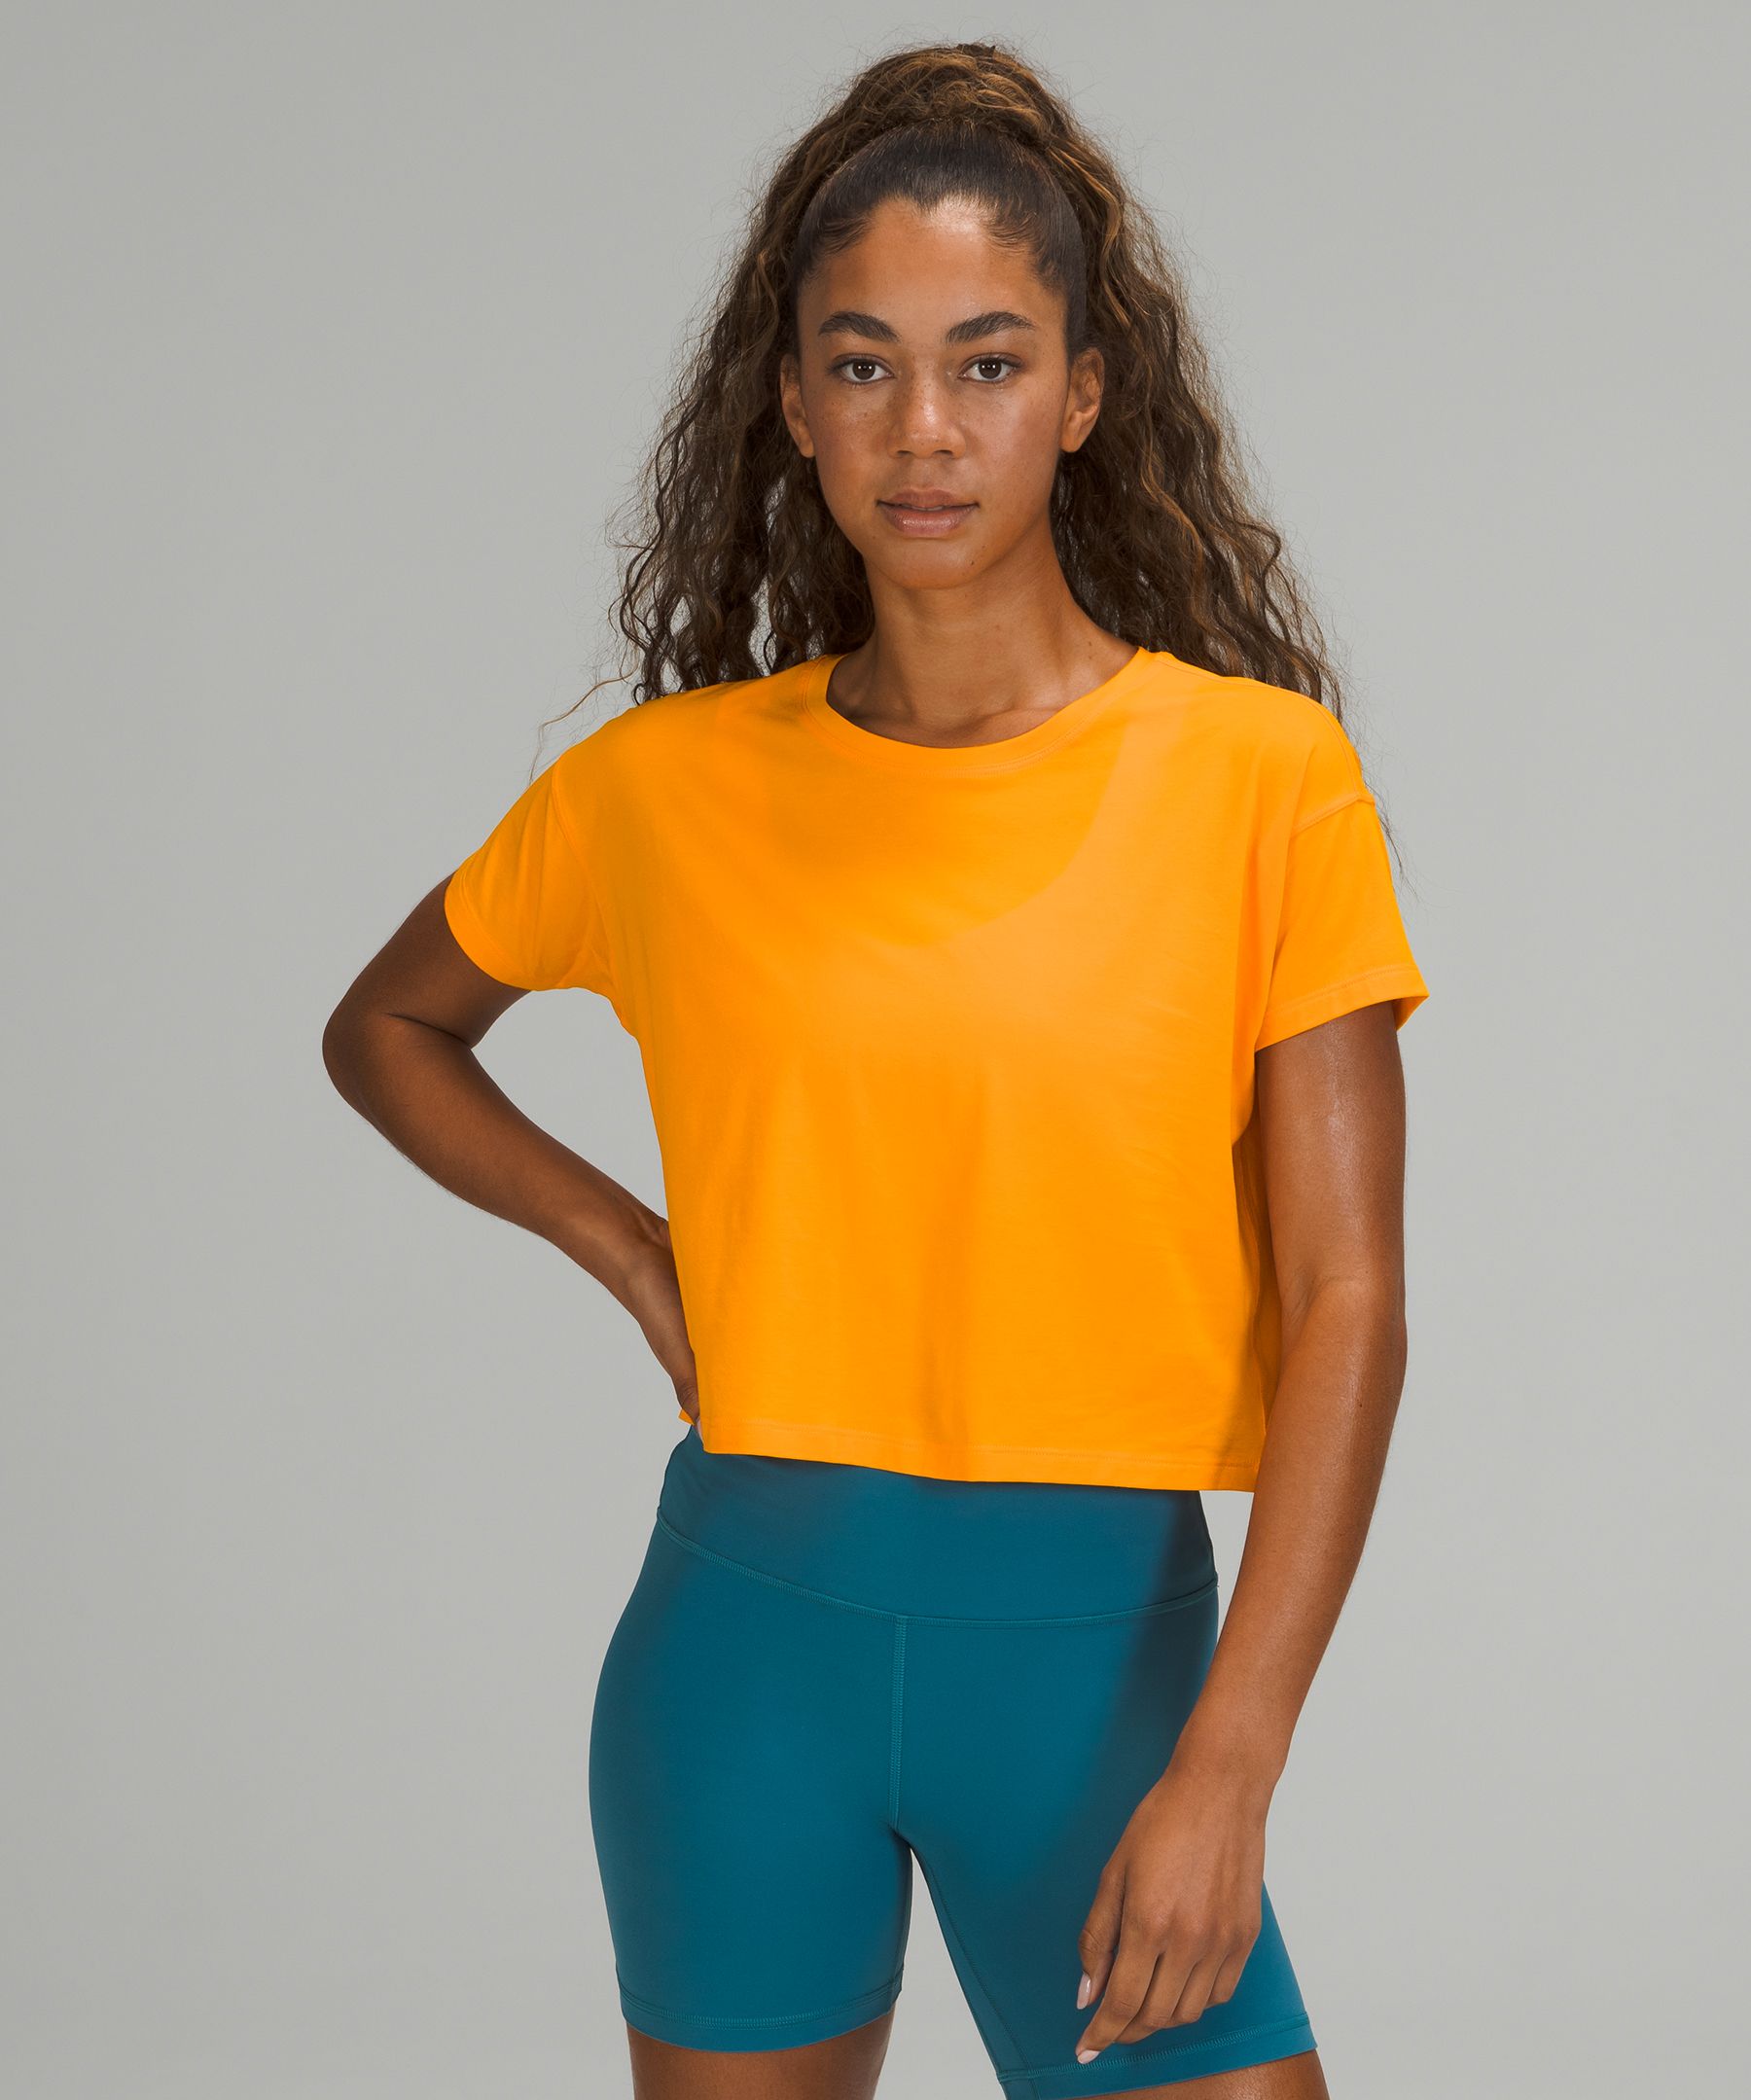 Lululemon Cates T-shirt In Clementine